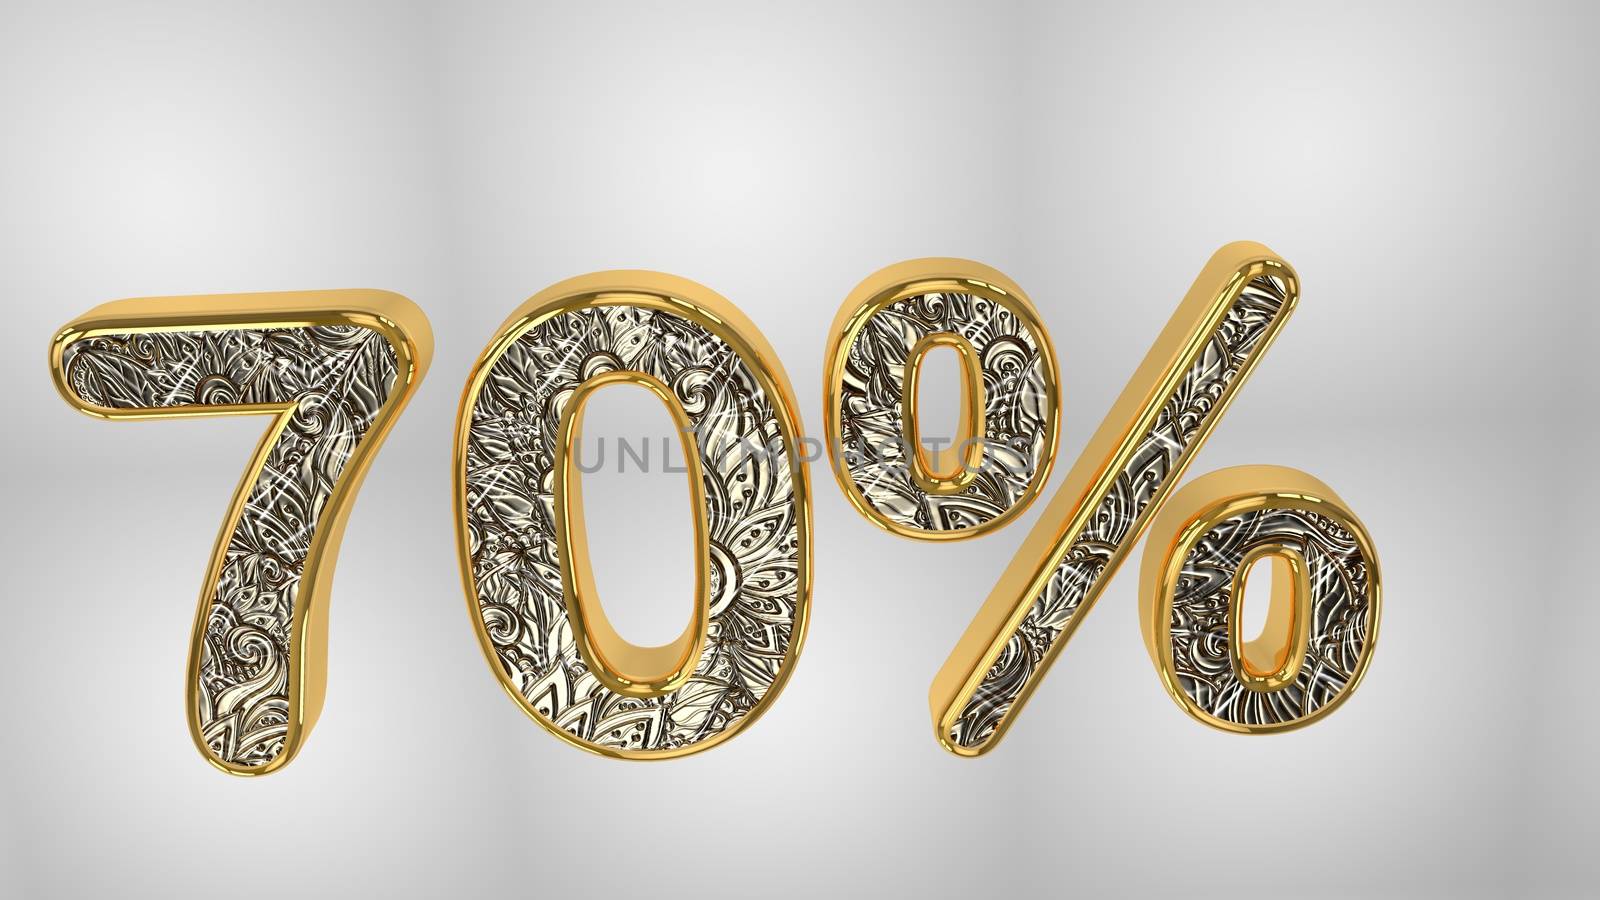 % off discount promotion sale made of realistic 3d Gold helium text, 3D rendering. Illustration of 3D text with off discount text.